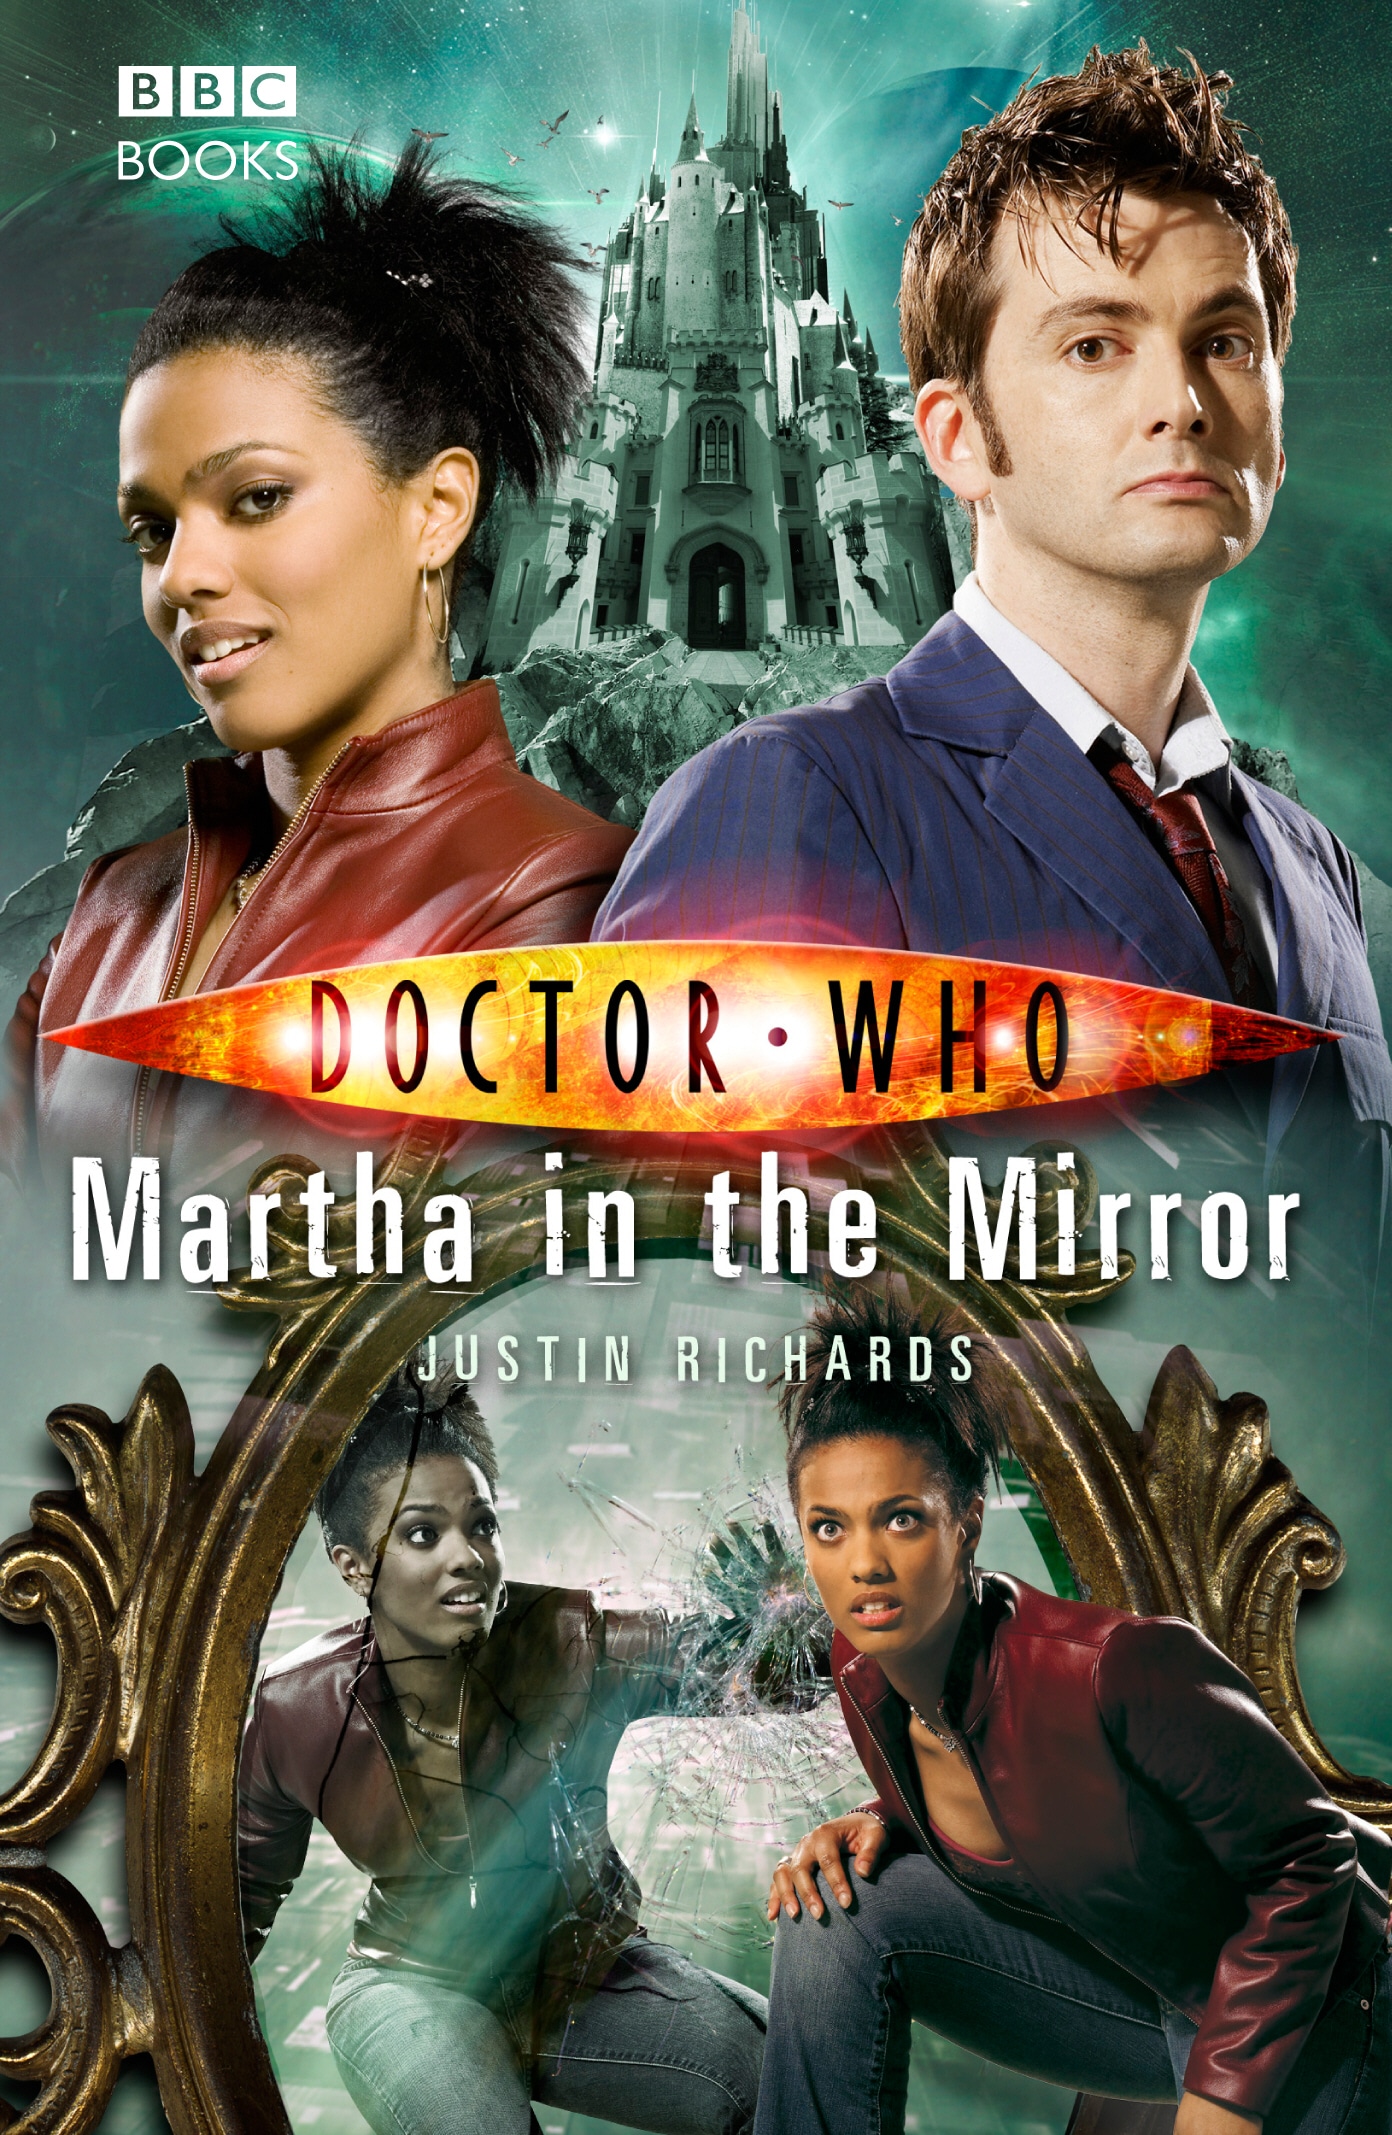 Book “Doctor Who: Martha in the Mirror” by Justin Richards — February 13, 2014